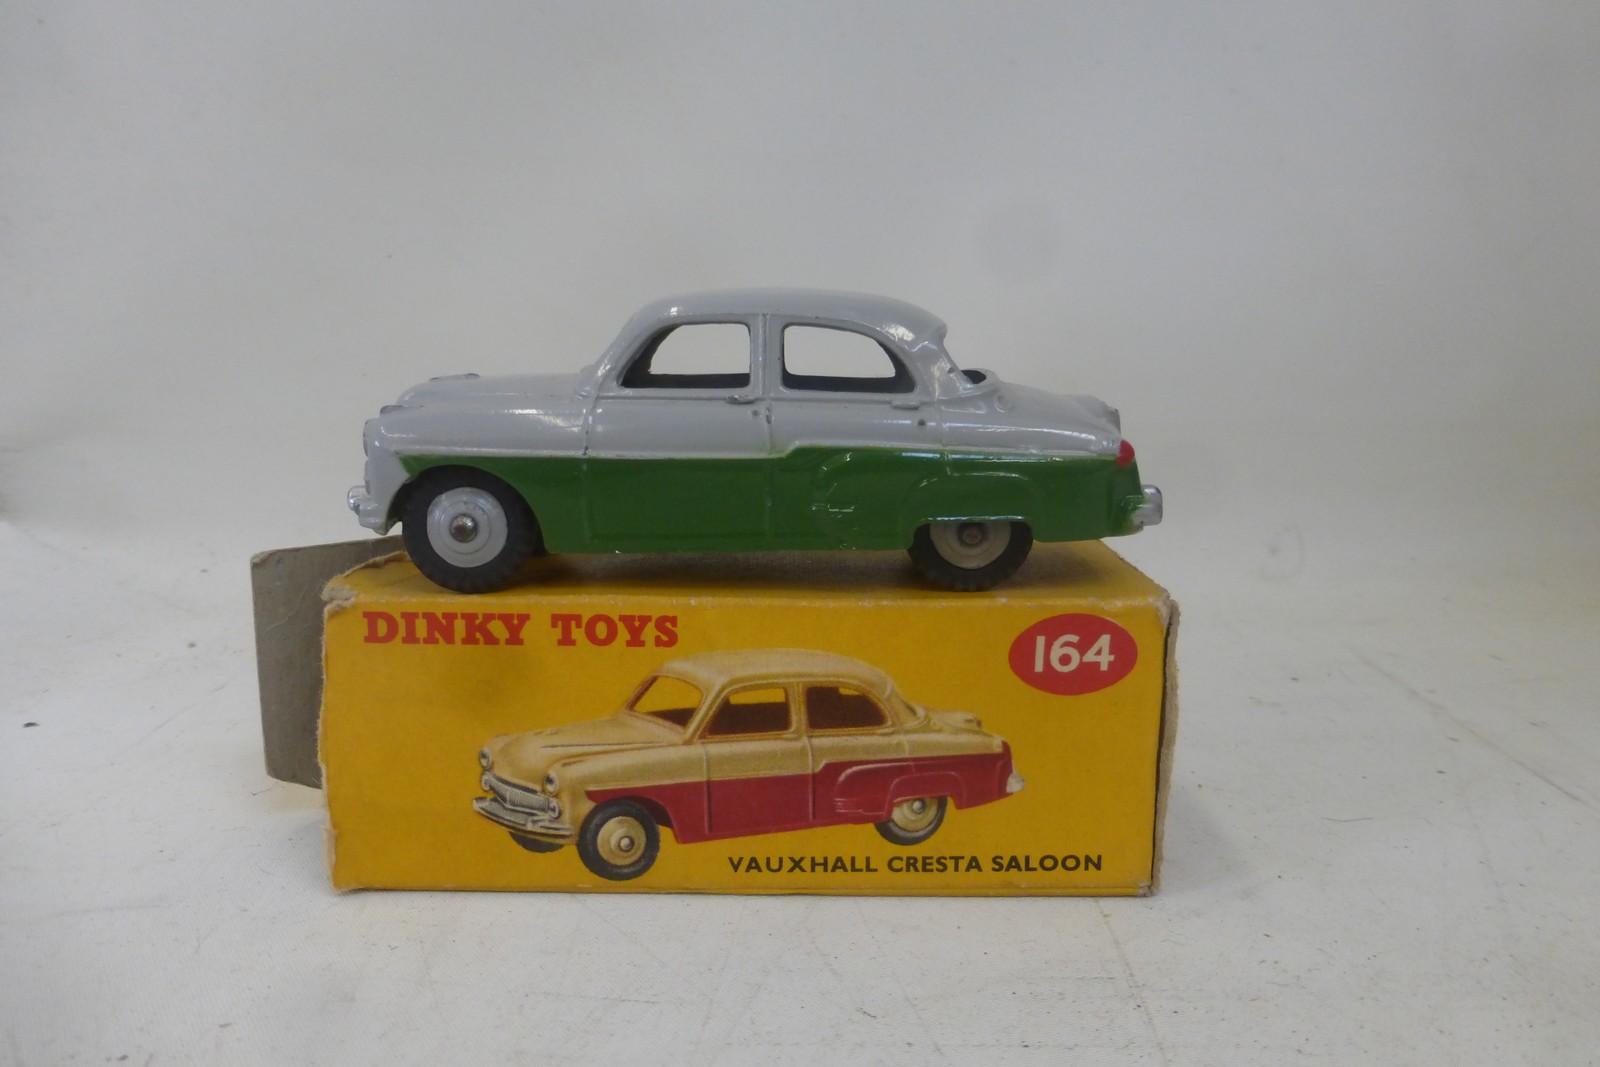 DINKY TOYS - Vauxhall Cresta, no. 164, in excellent condition, yellow box fair/good with correct